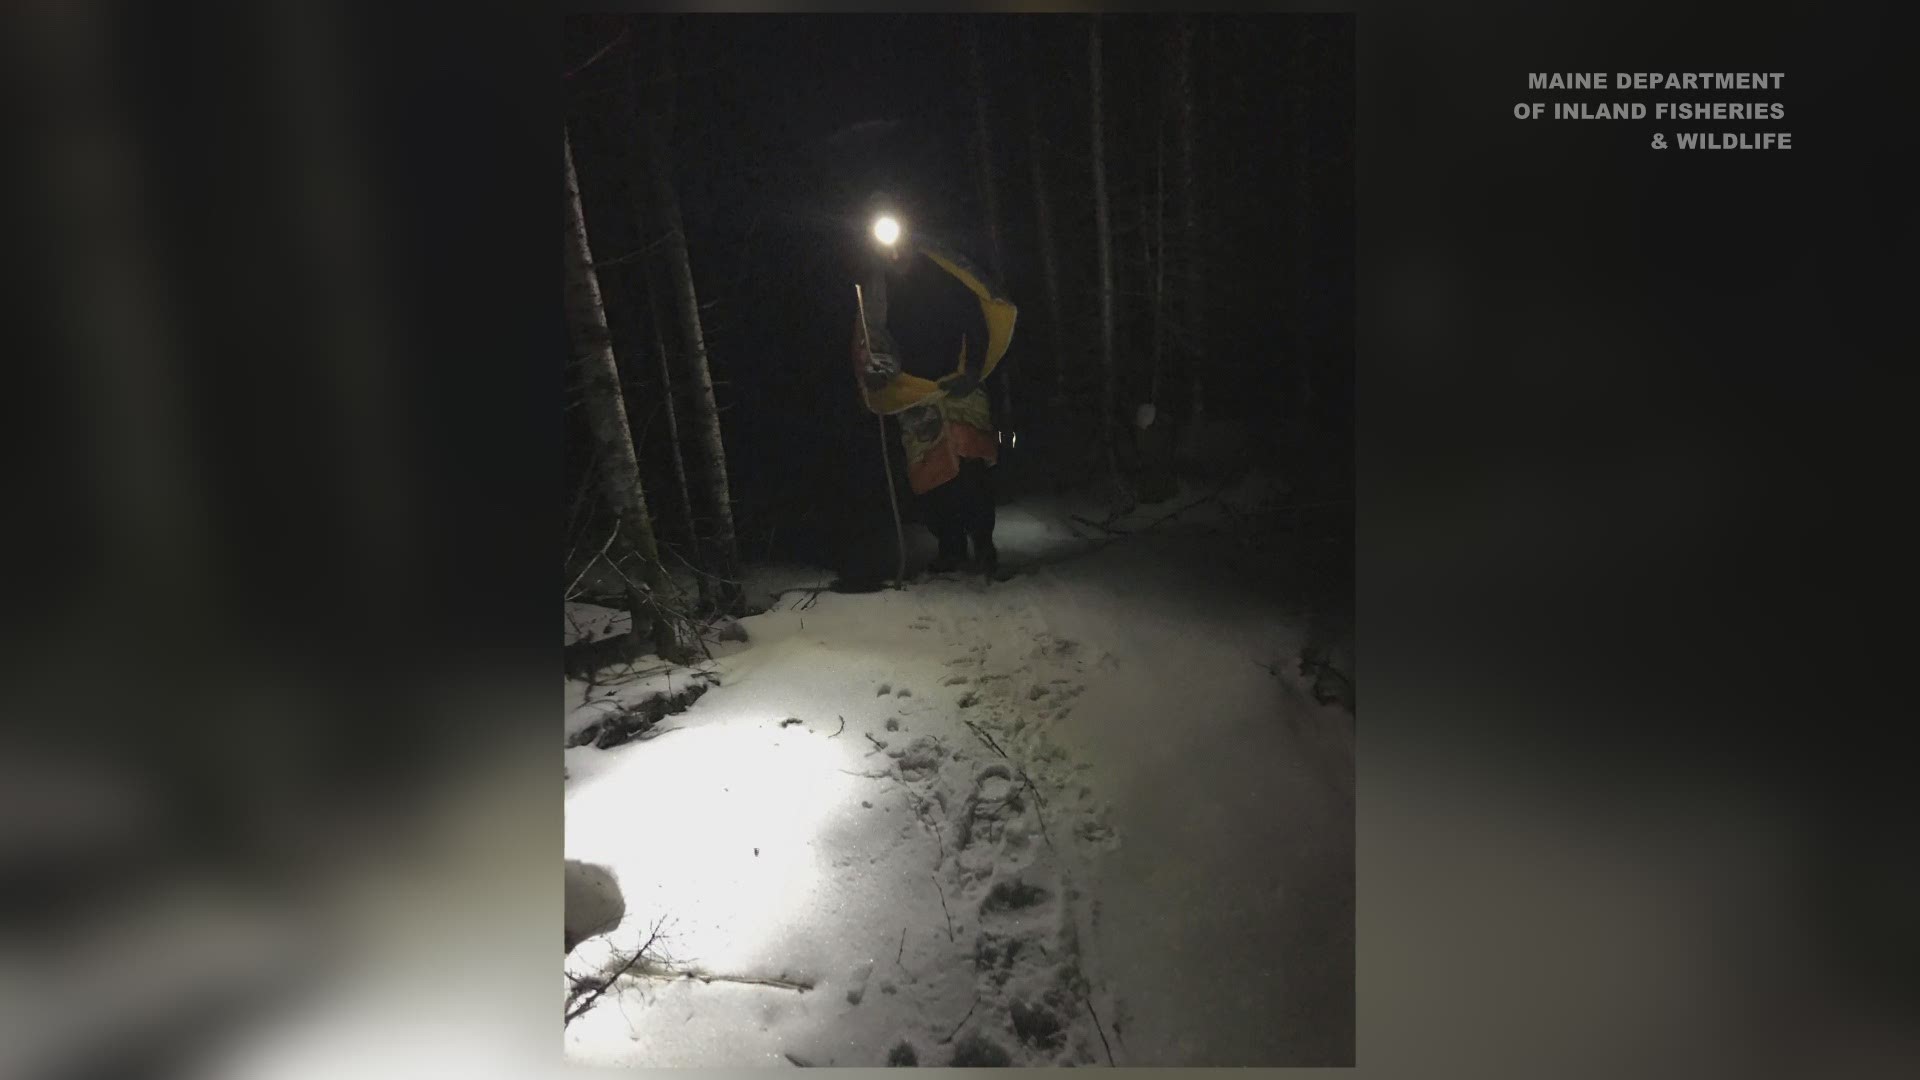 The Maine Game Wardens rescue two separate parties that were hiking in the cold